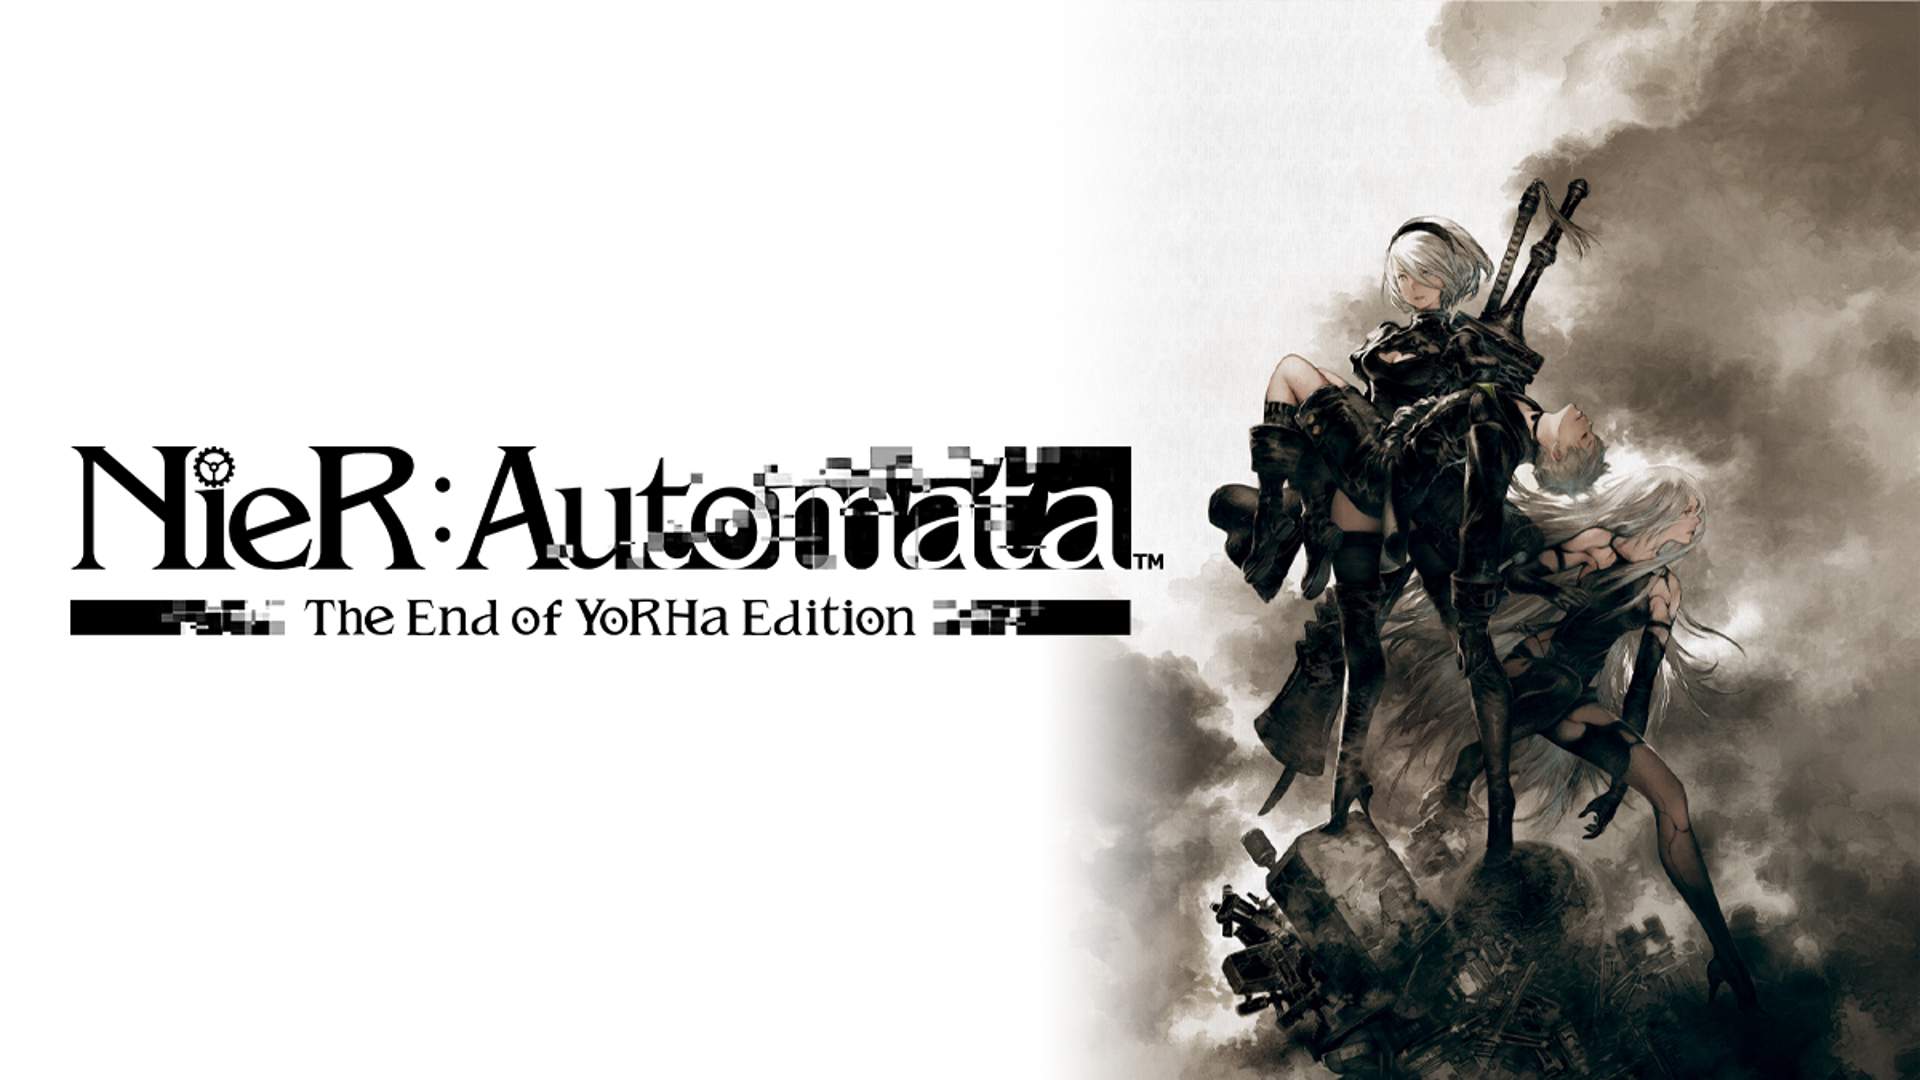 NieR:Automata The End of the YoRHa Edition